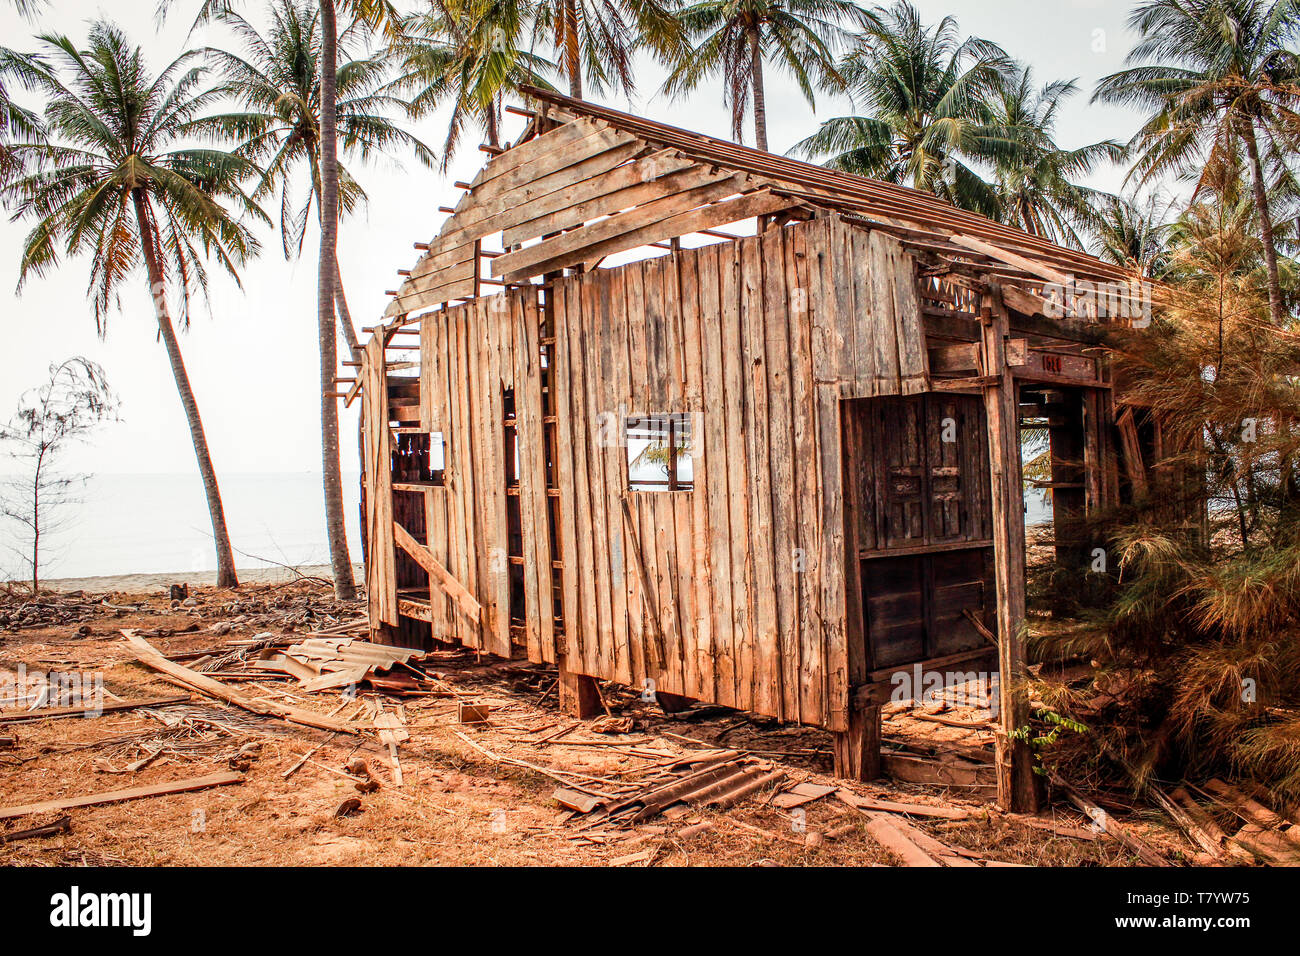 destroyed home at coast , wooden hut ruin / destroyed house made of wood Stock Photo